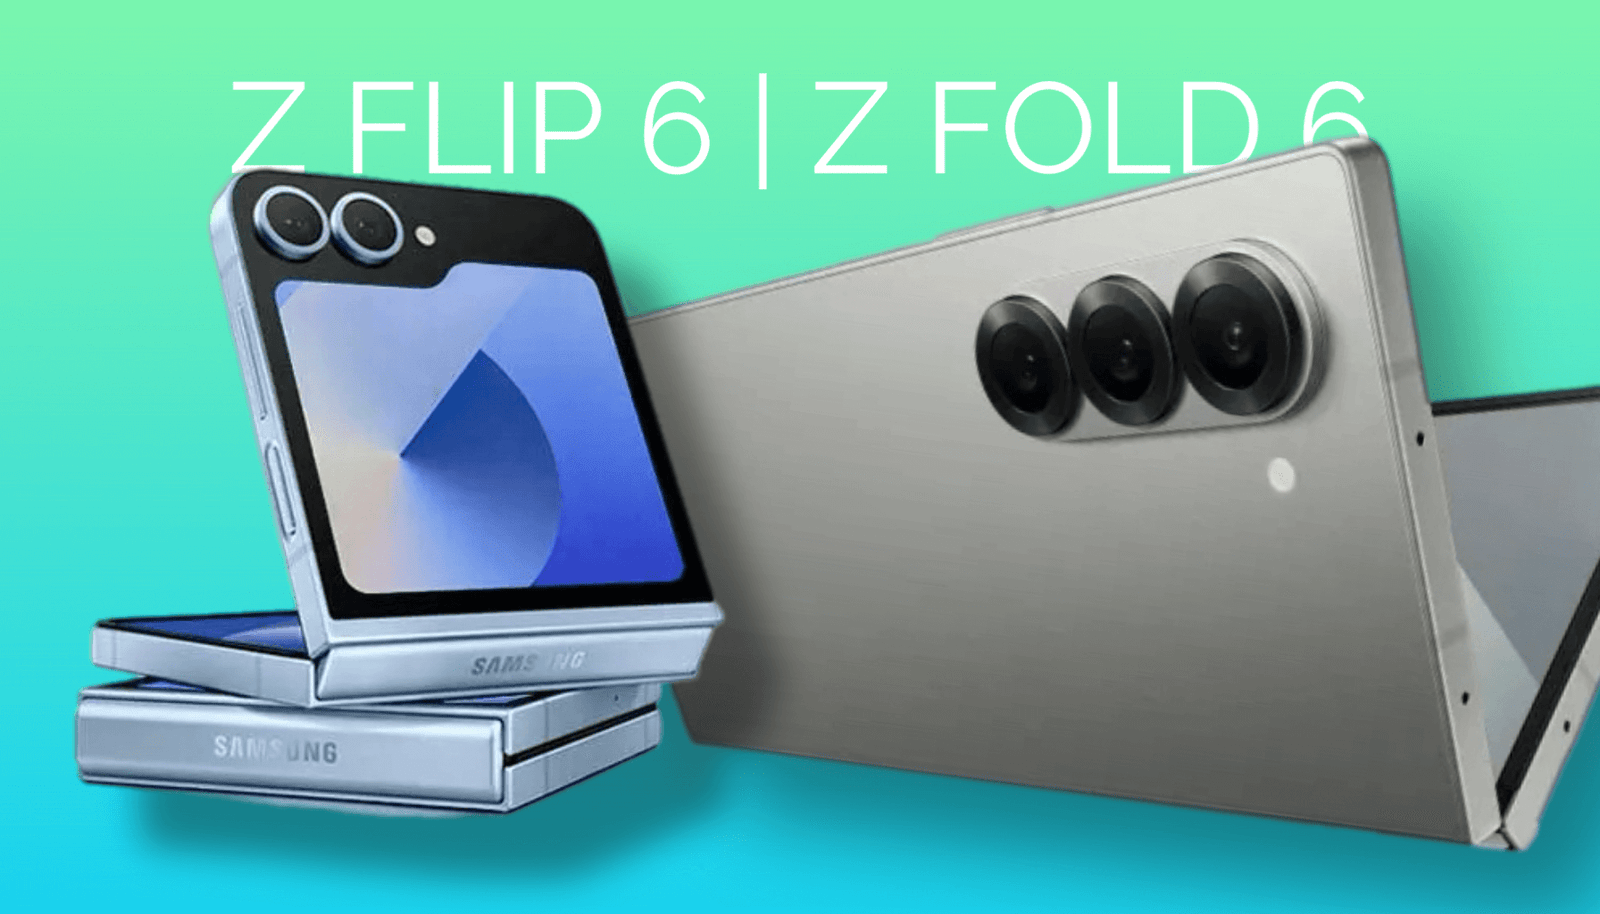 Samsung Galaxy Z Flip 6 and Z Fold 6: What to Expect